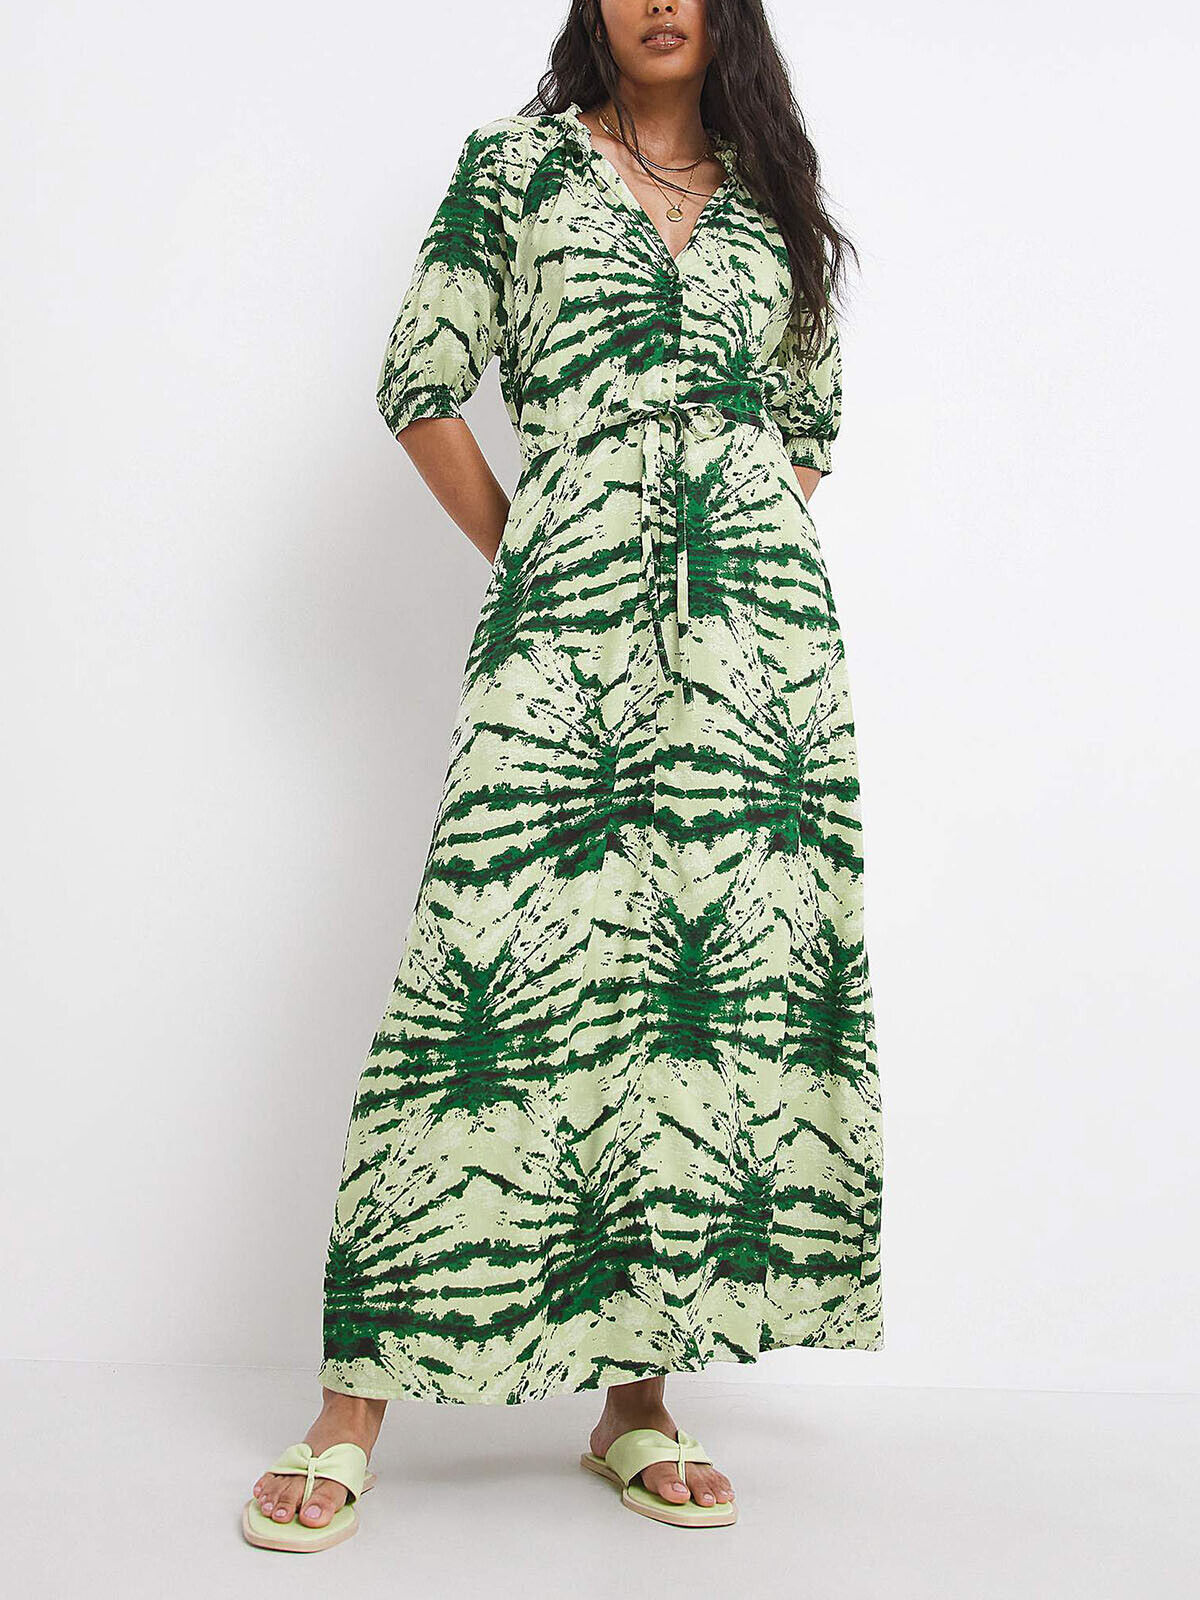 JD Williams Green Printed Open Neck Waisted Midi Dress 14, 18, 20, 24, 26, 28